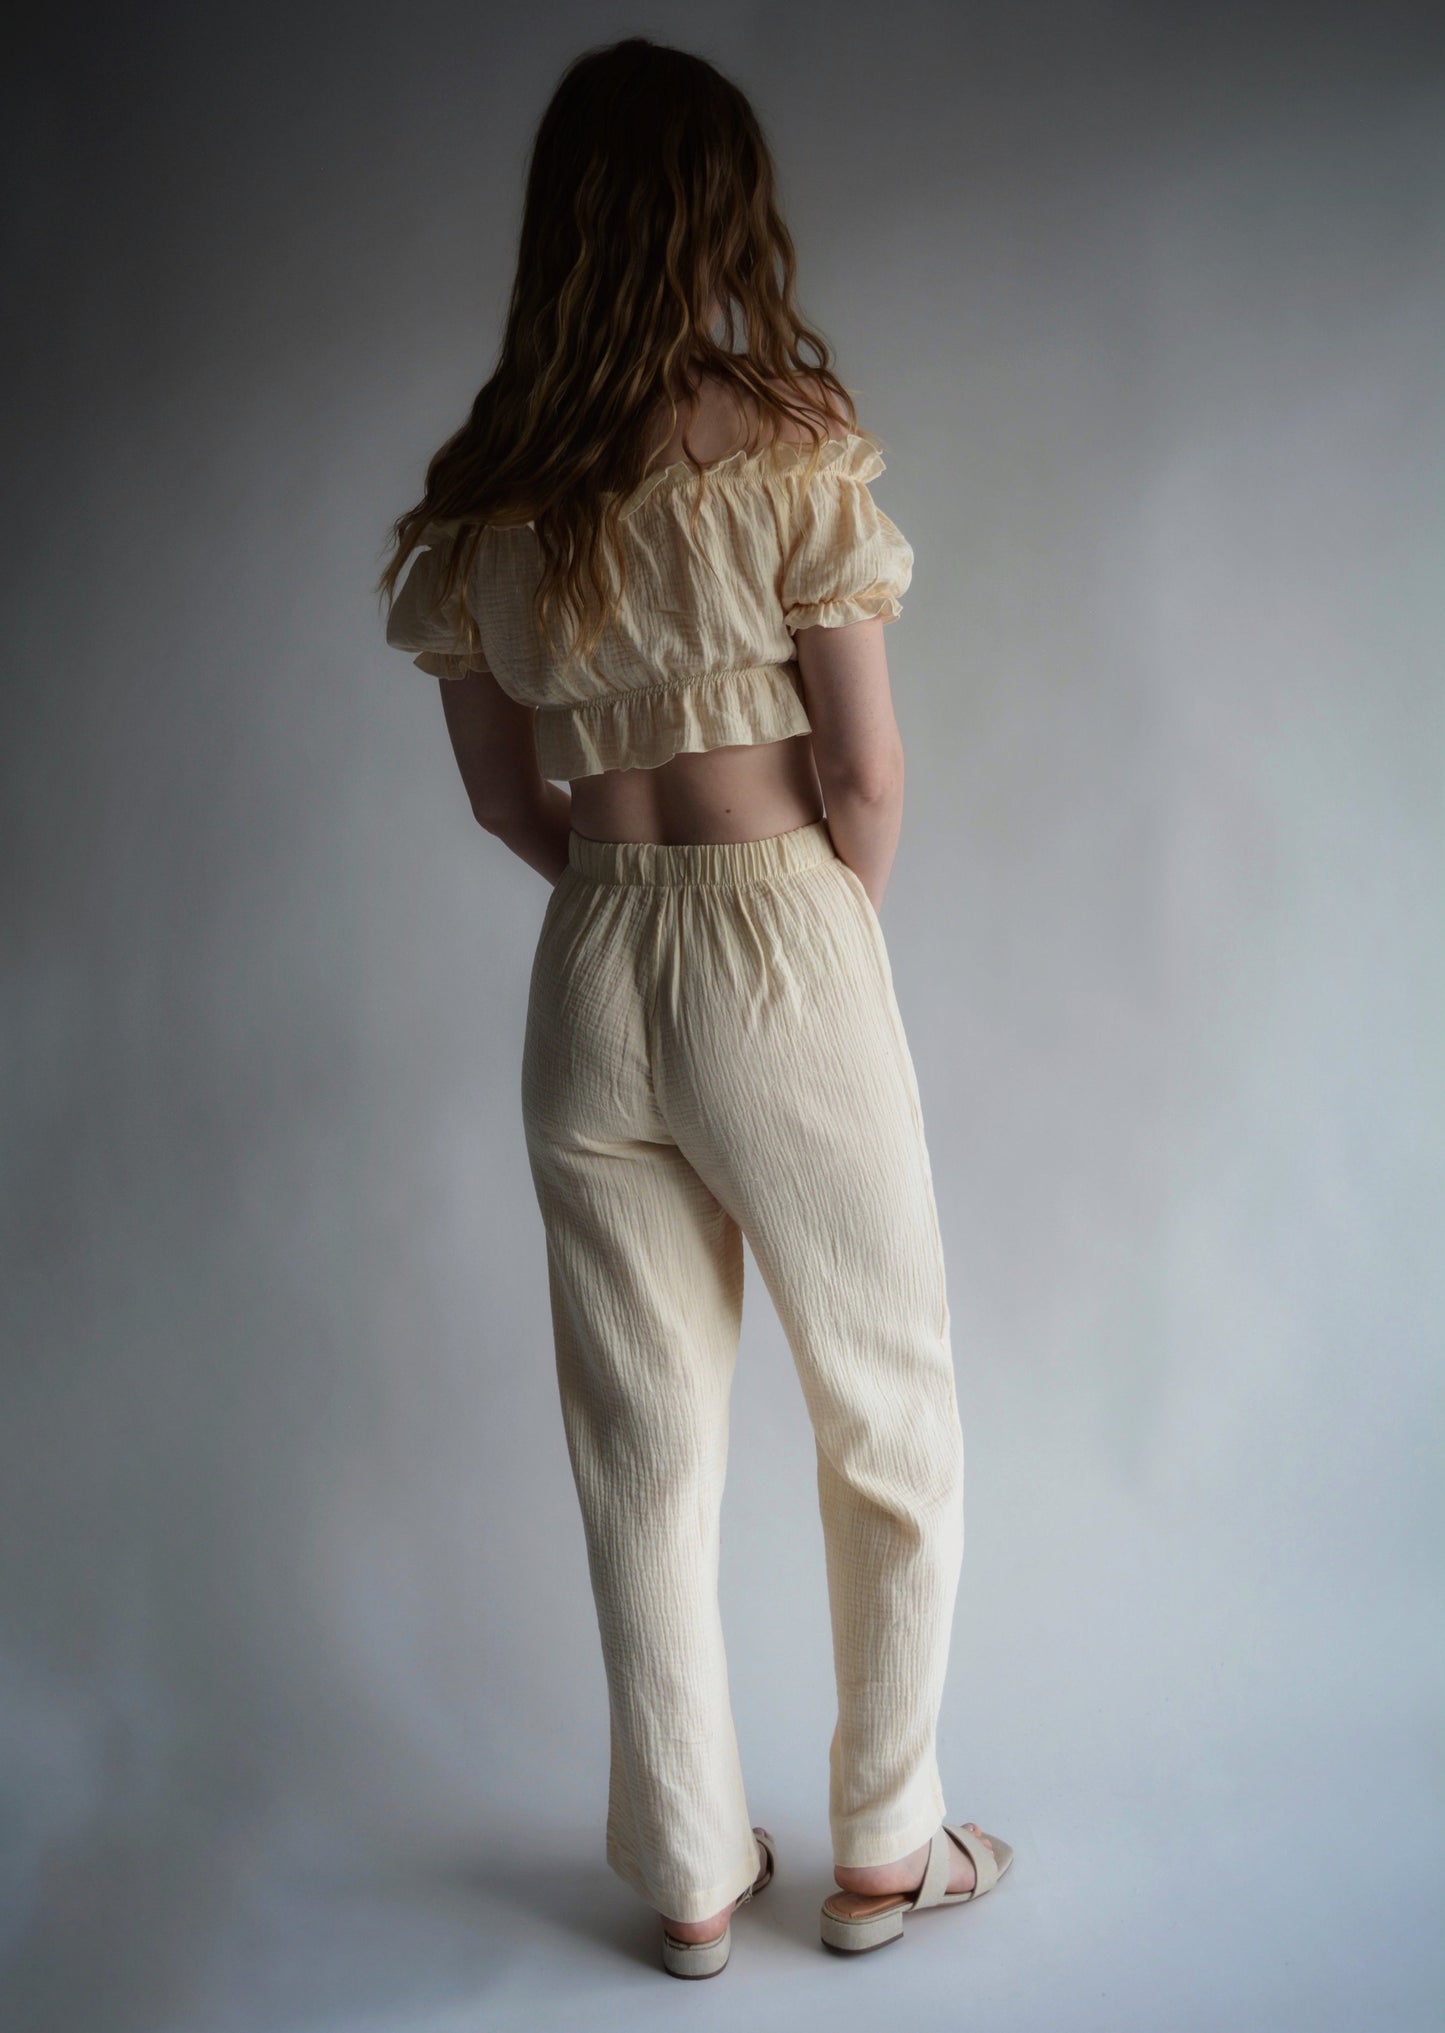 Cotton Muslin  Two-Piece Set: Crop Top and Pants in Ivory